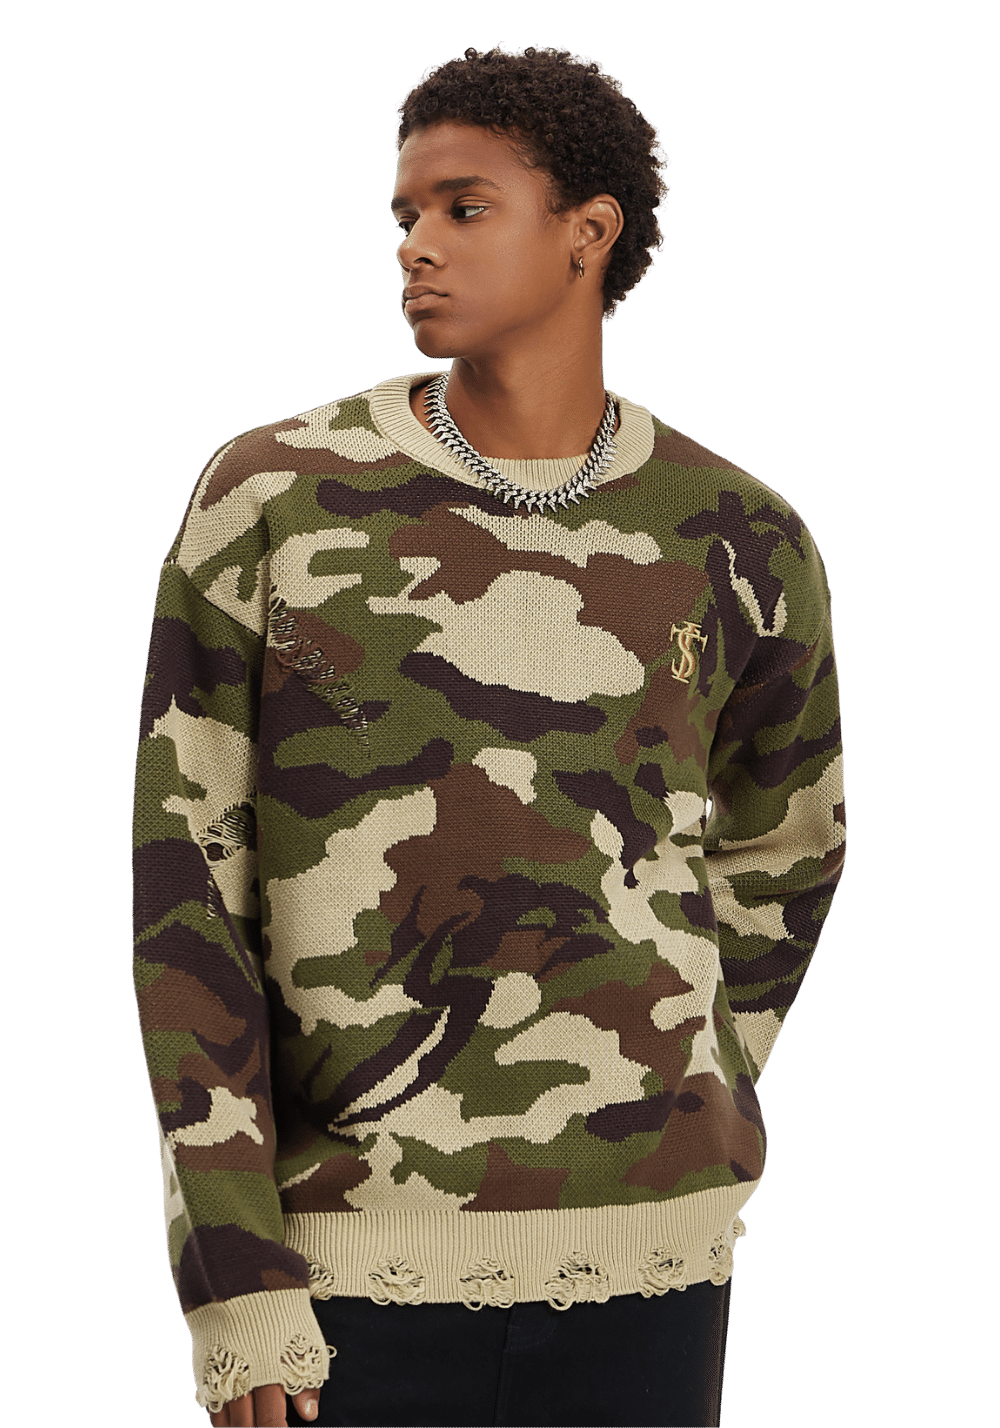 Camouflage Knitted Sweater - PSYLOS 1, Camouflage Knitted Sweater, Sweater, Small Town Kid, PSYLOS 1